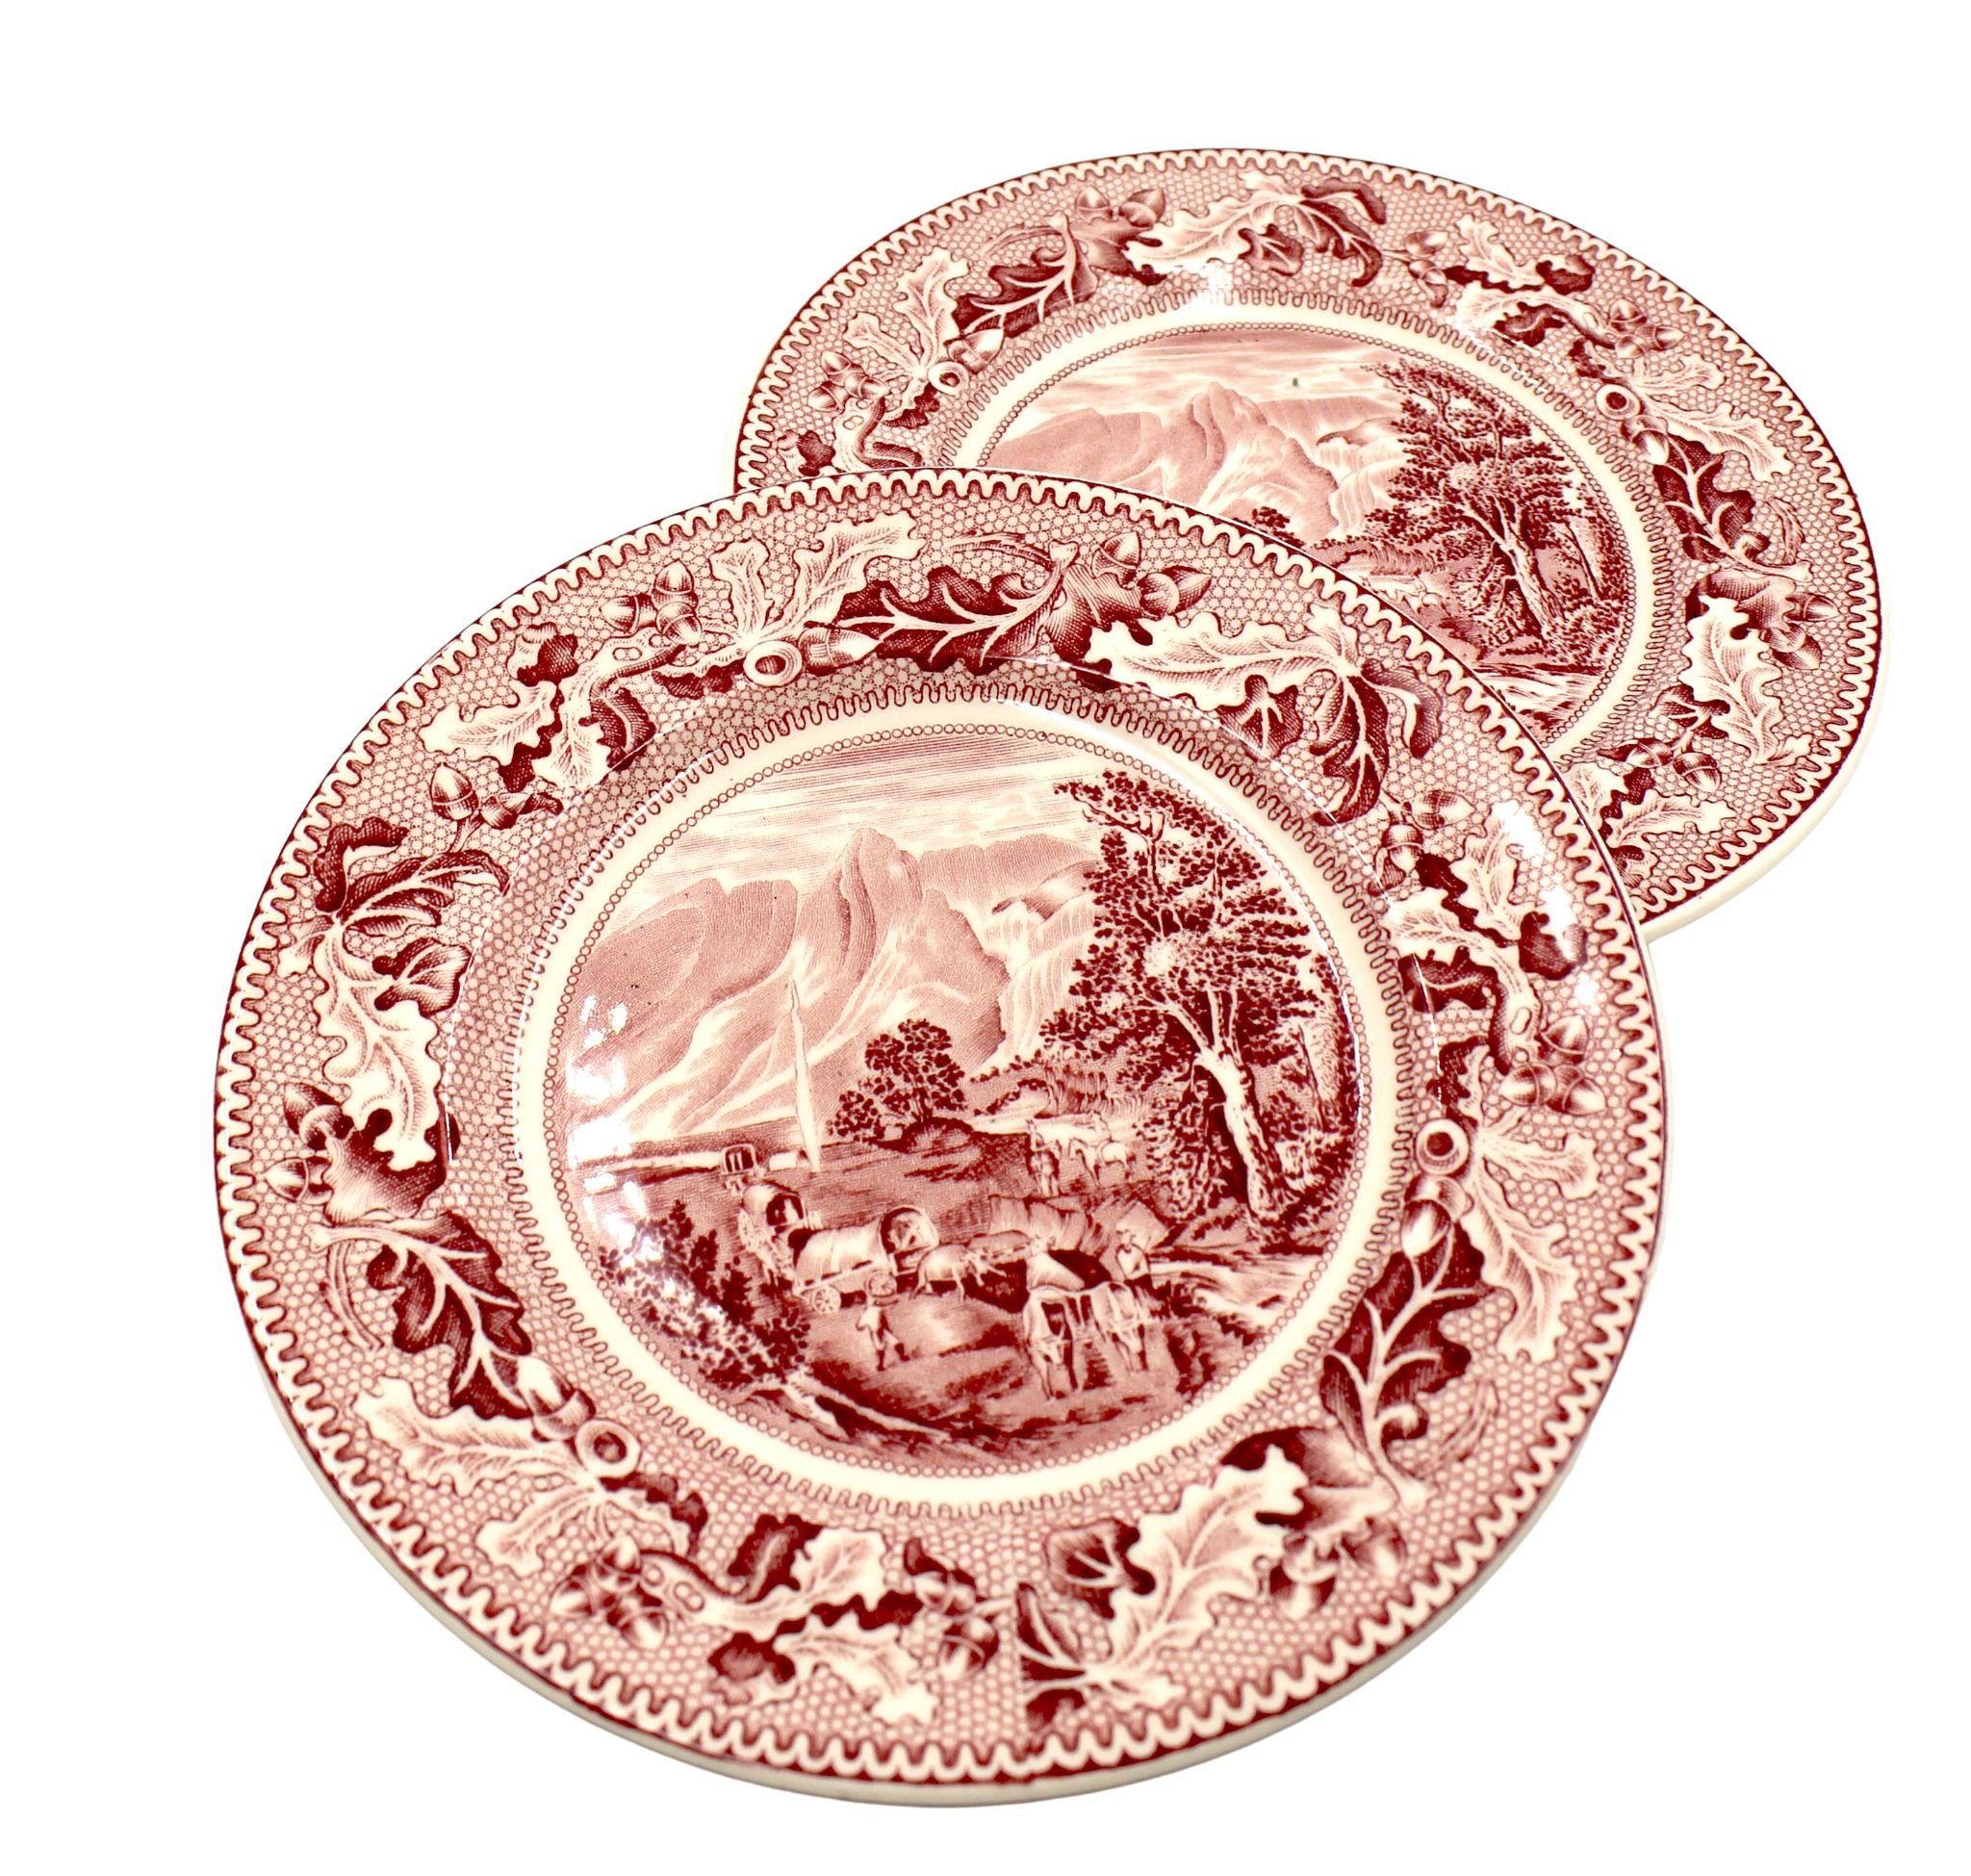 Presented is a set of two red-glazed transferware bread and butter plates, by the famous British potters Johnson Brothers. Made in England, this set comes from their “Historic America” line of ceramics, with the specific pattern celebrating the